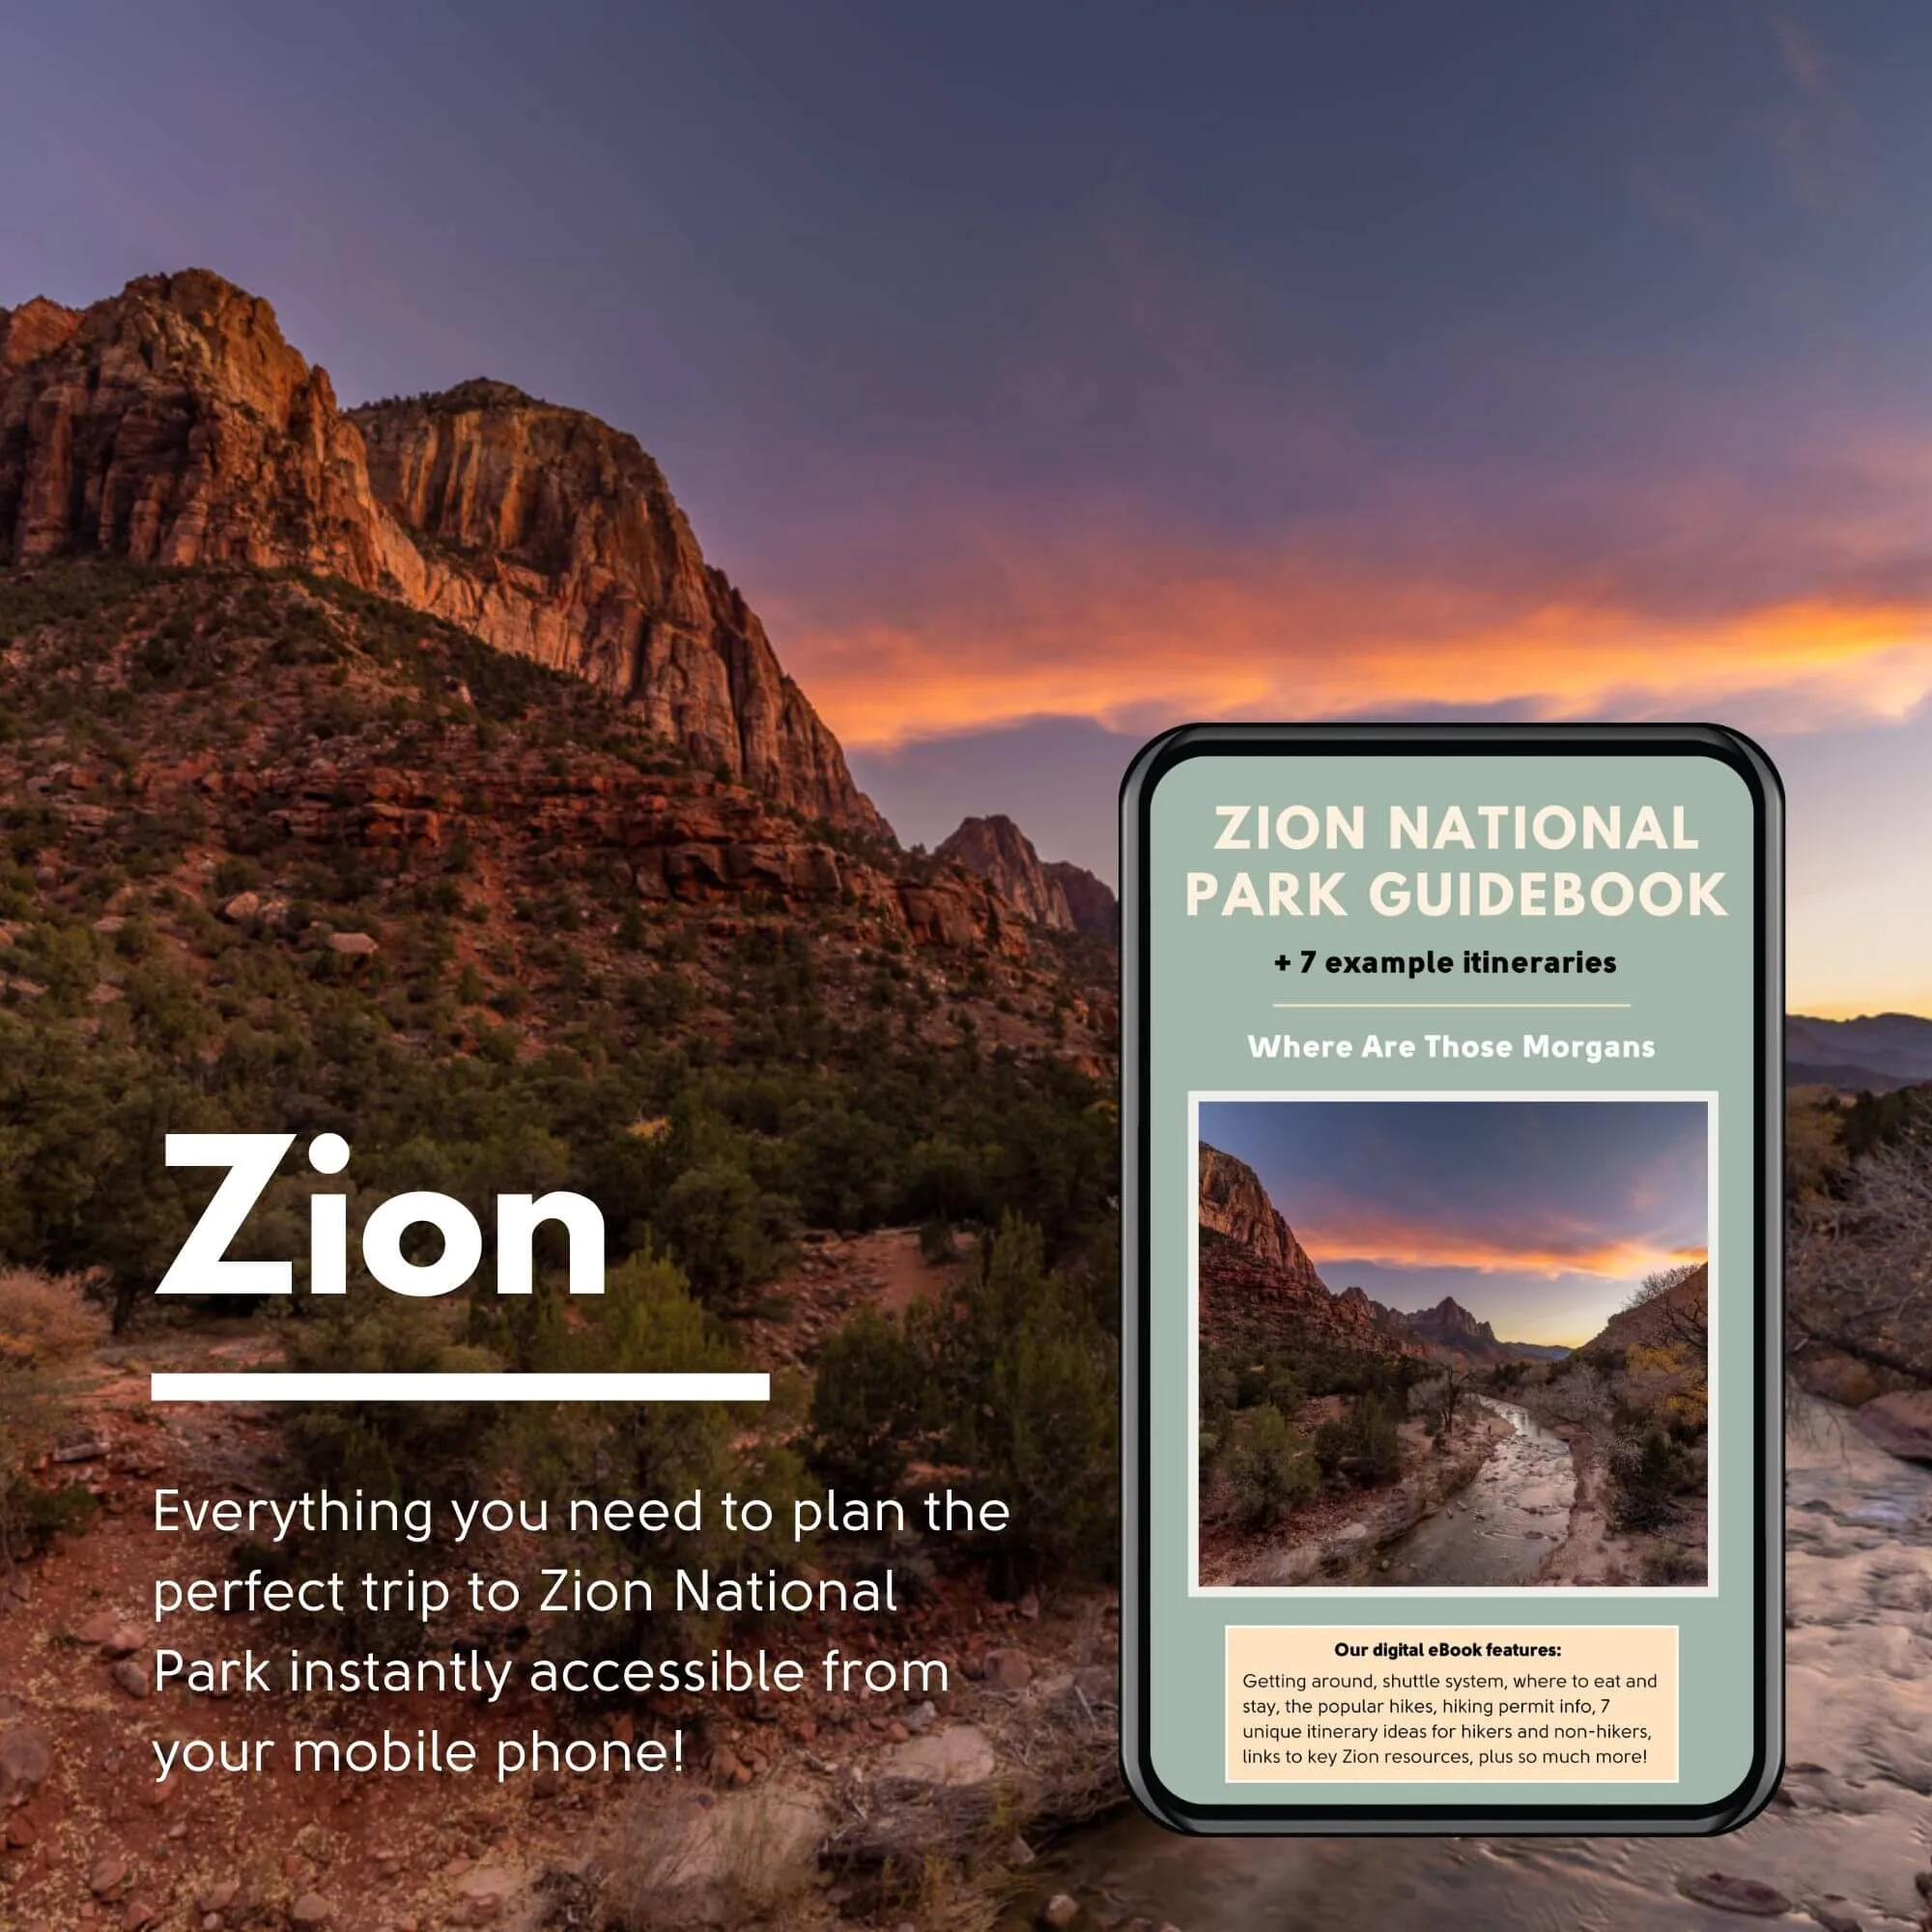 Where Are Those Morgans Zion travel guidebook